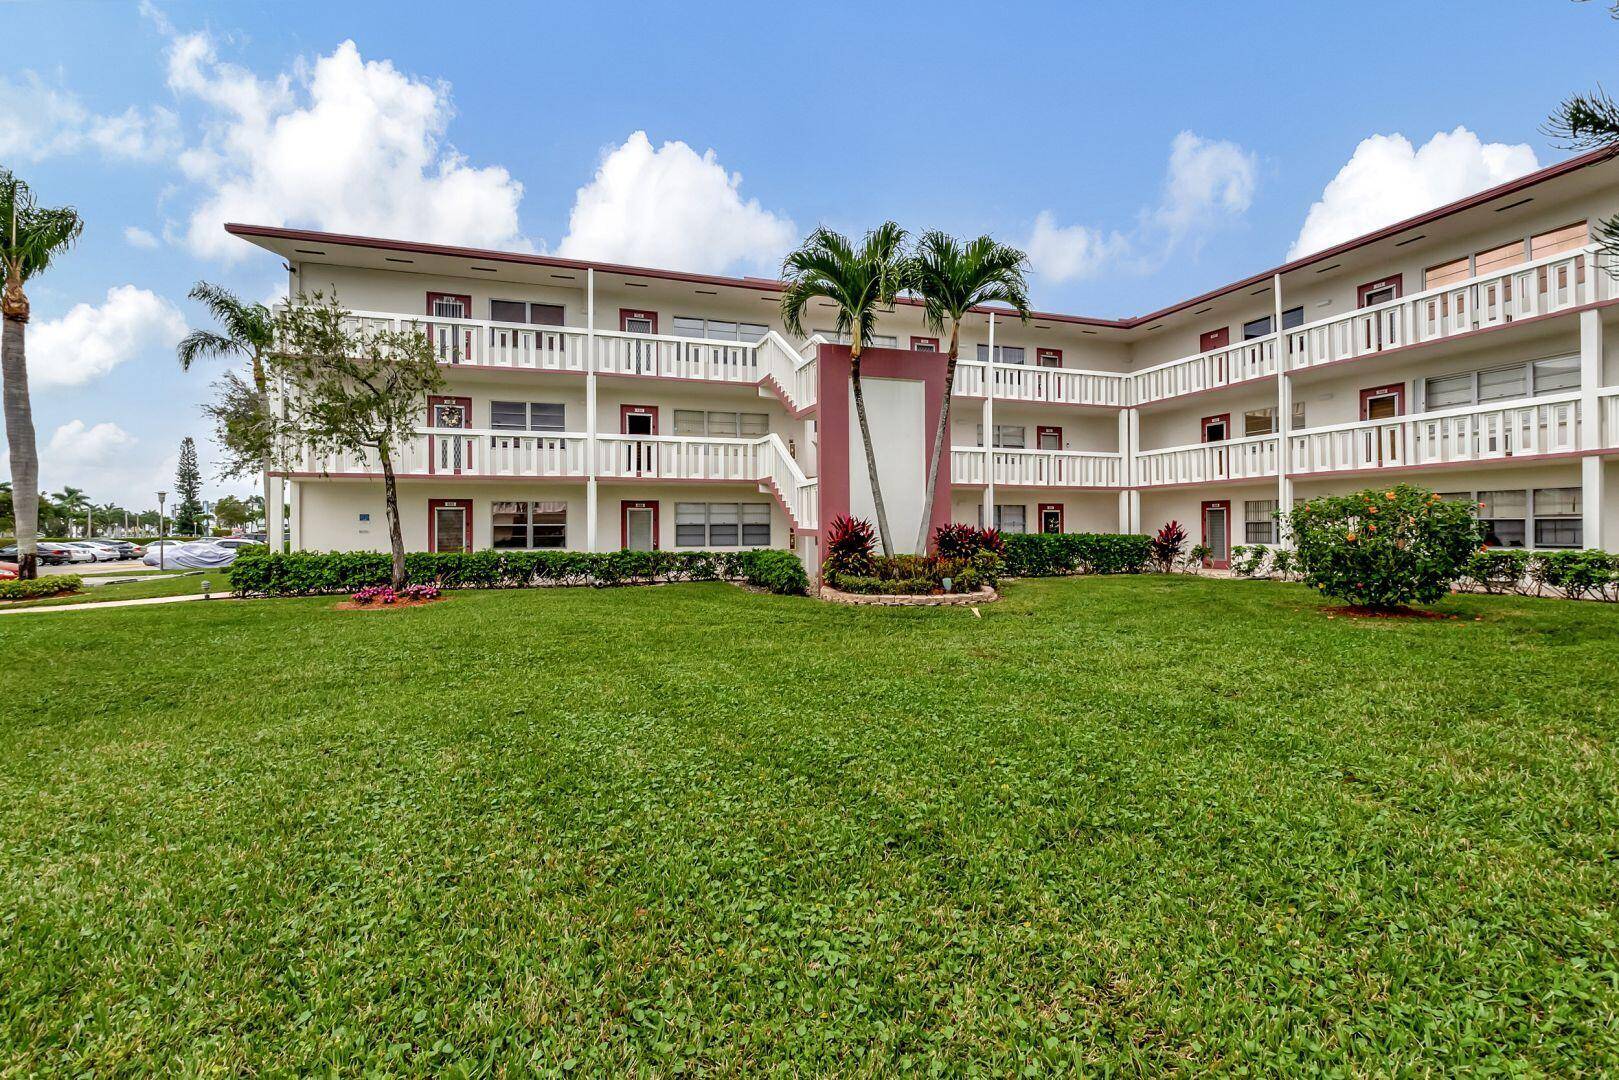 2 1. 5, 3rd floor, CORNER, lots of windows which are hurricance impact, light and bright apt, updated kitchen, lots of cabinets, granite, recessed lighting in kitchen, updated bathrooms, tile ...